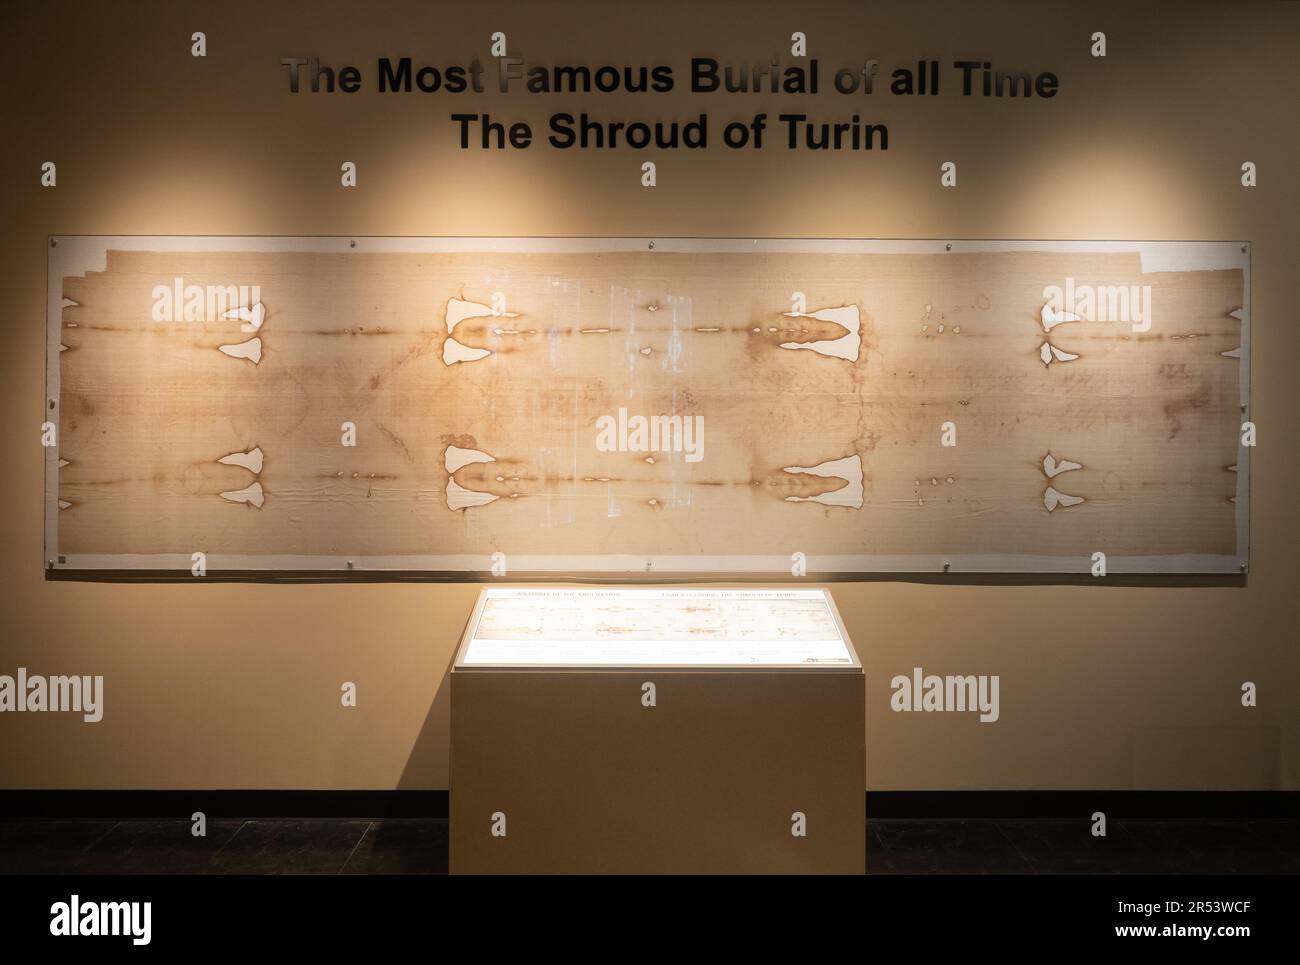 Certified Replica of the Shroud of Turin on display in a recently opened exhibit in the National Museum of Funeral History in Houston, Texas Stock Photo